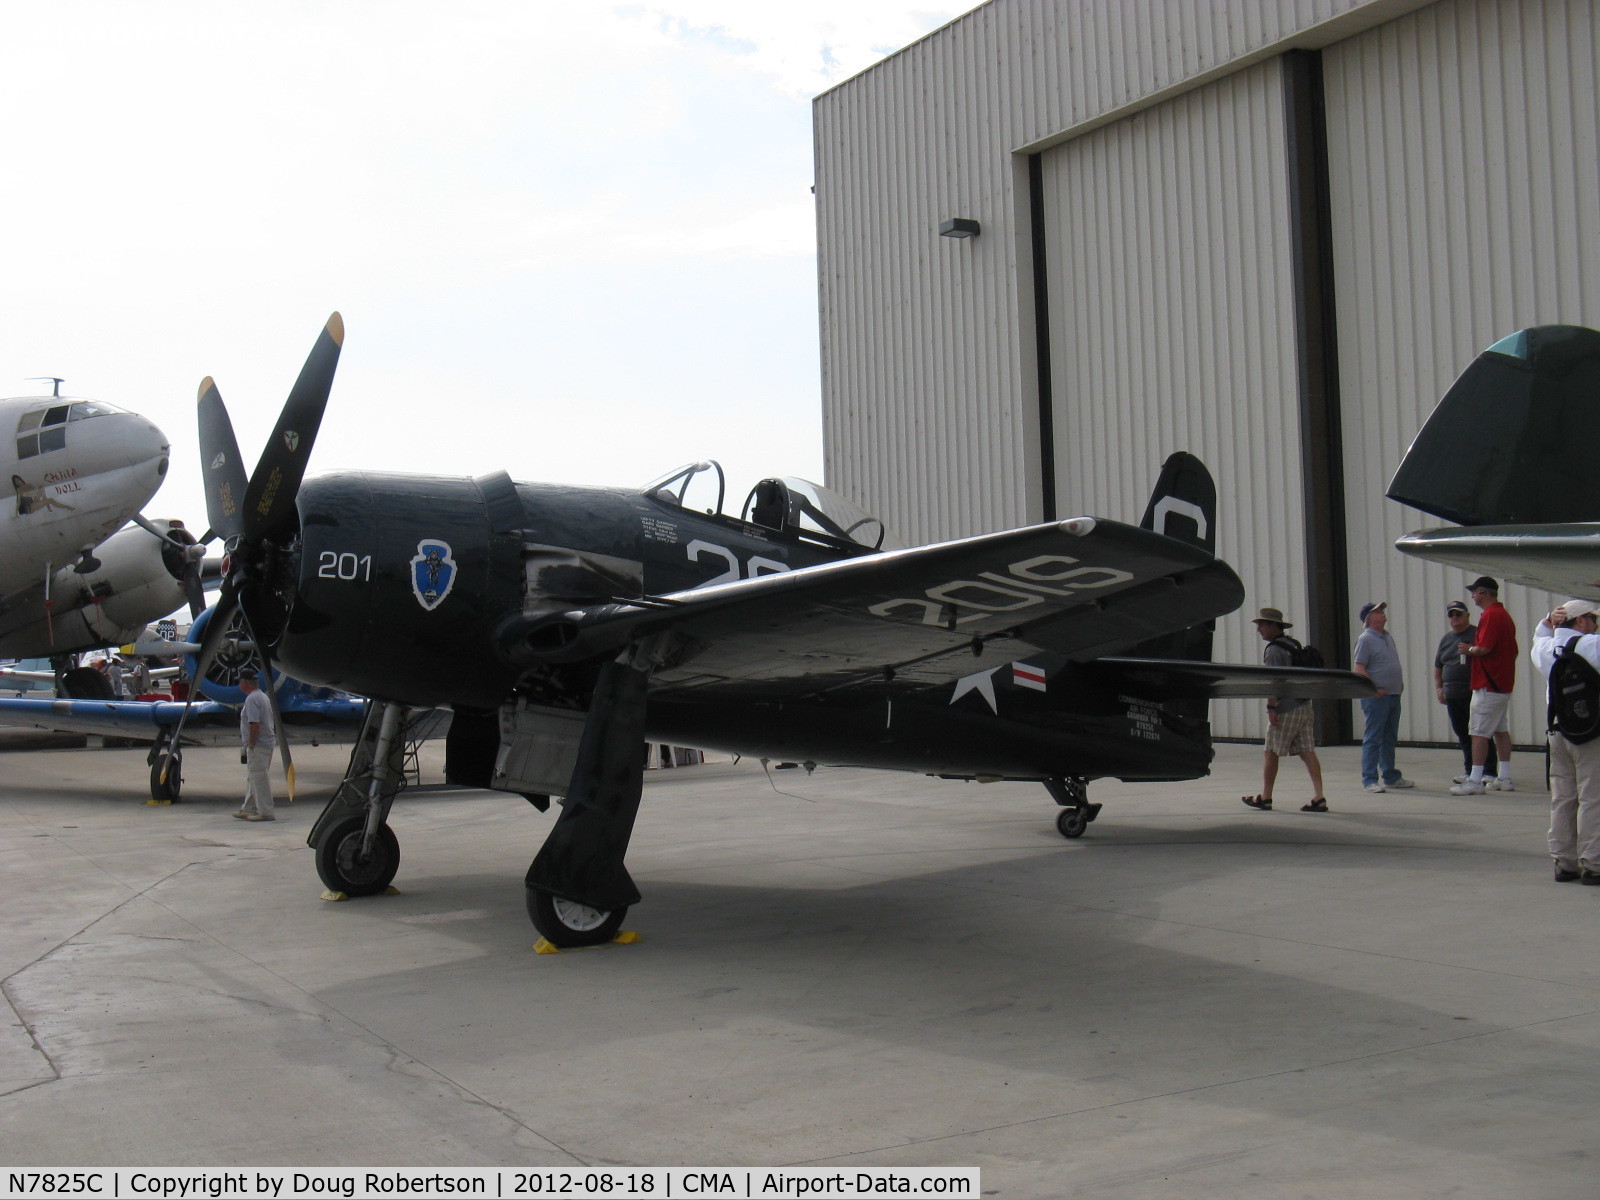 N7825C, 1948 Grumman F8F-2 (G58) Bearcat C/N D.1227, 1949 Grumman F8F-2 BEARCAT, P&W R-2800-34W  Double Wasp 2,100 Hp